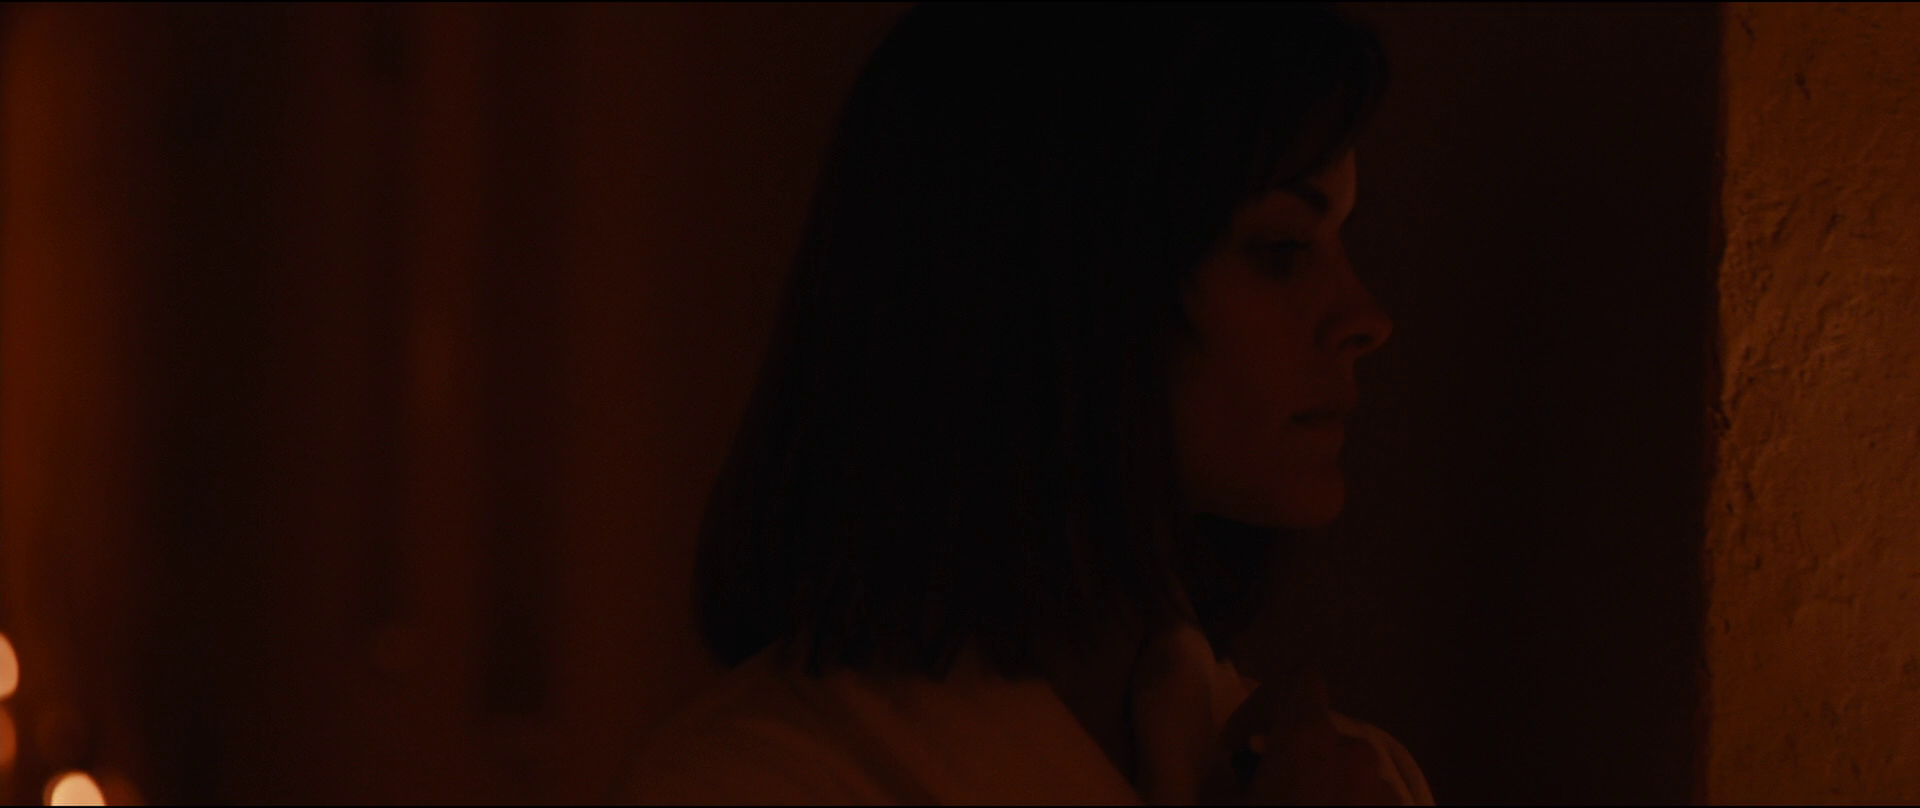  Intersections.2013.1080p.BluRay.x264-RUSTED 7.64GB-2.png